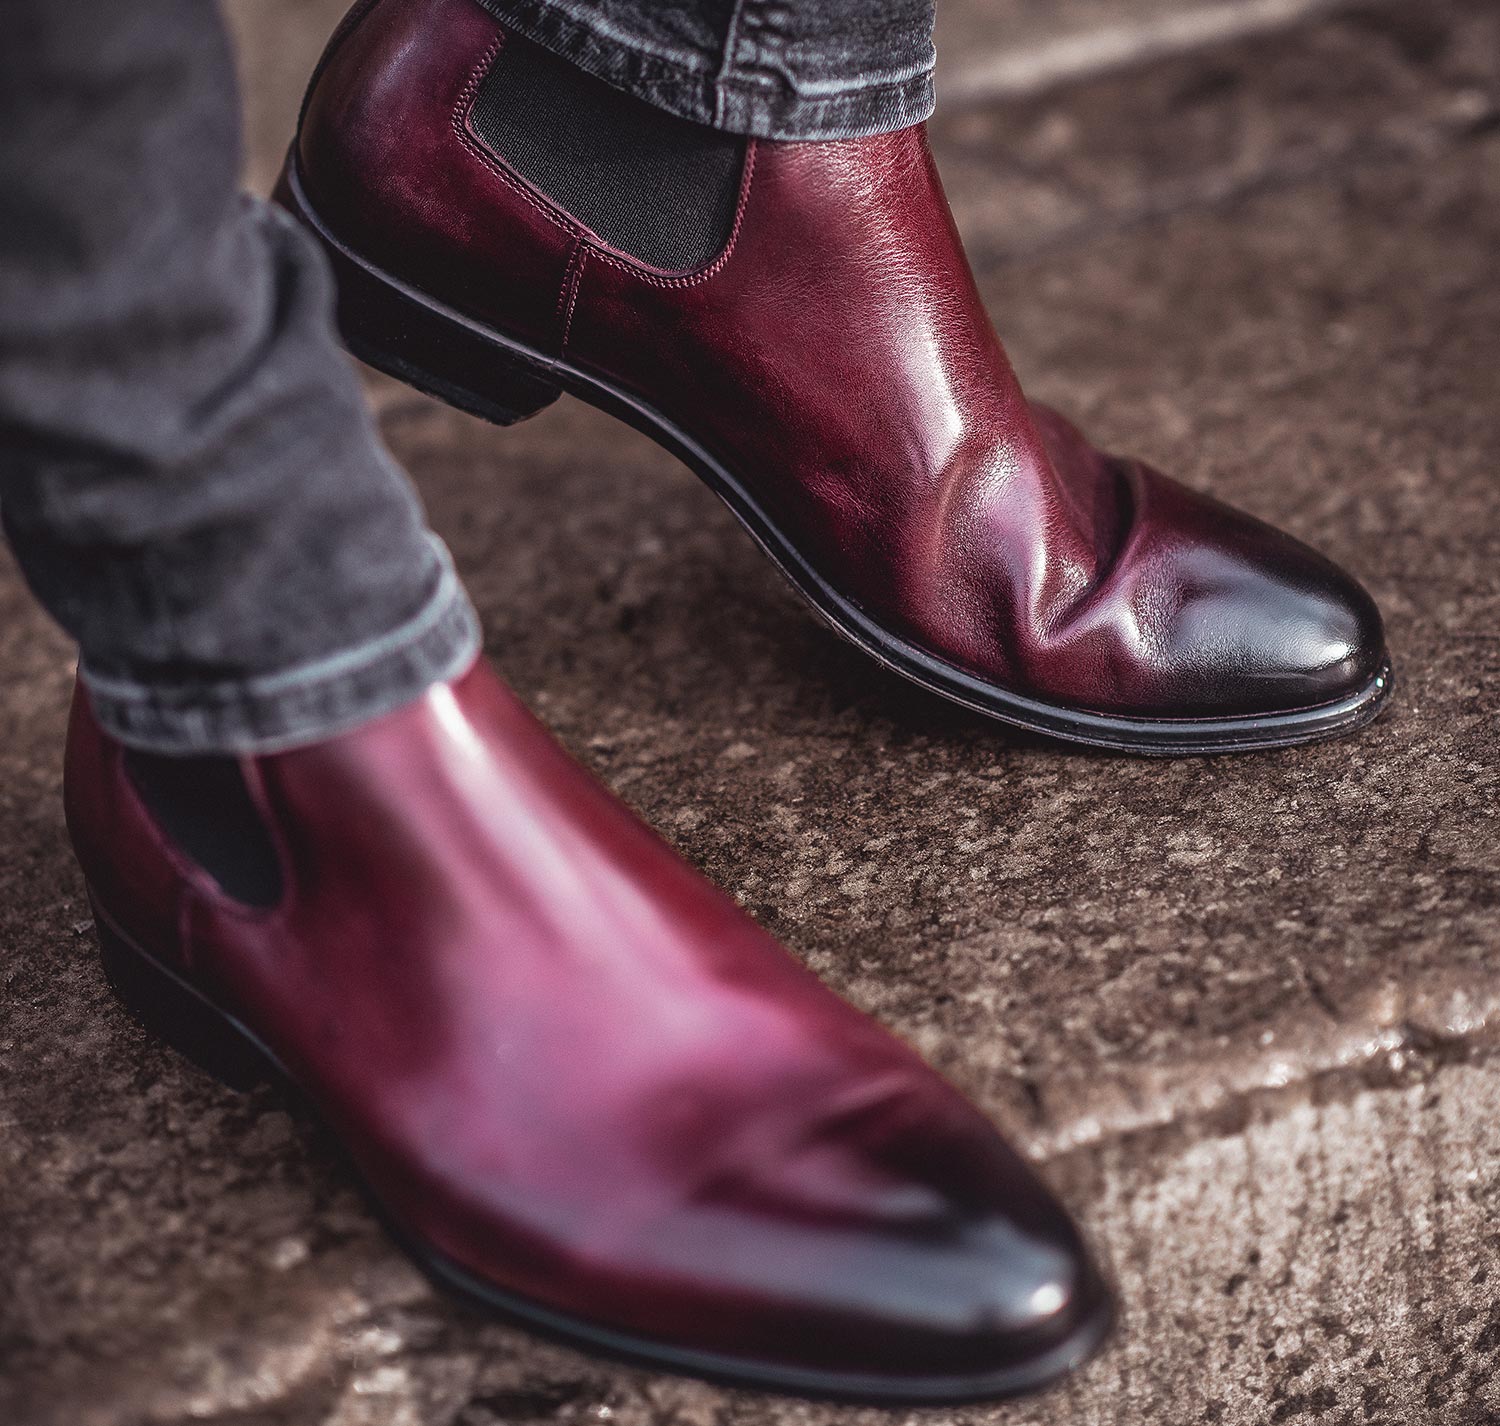 Top Leather Shoe Benefits For Men - Your Average Guy